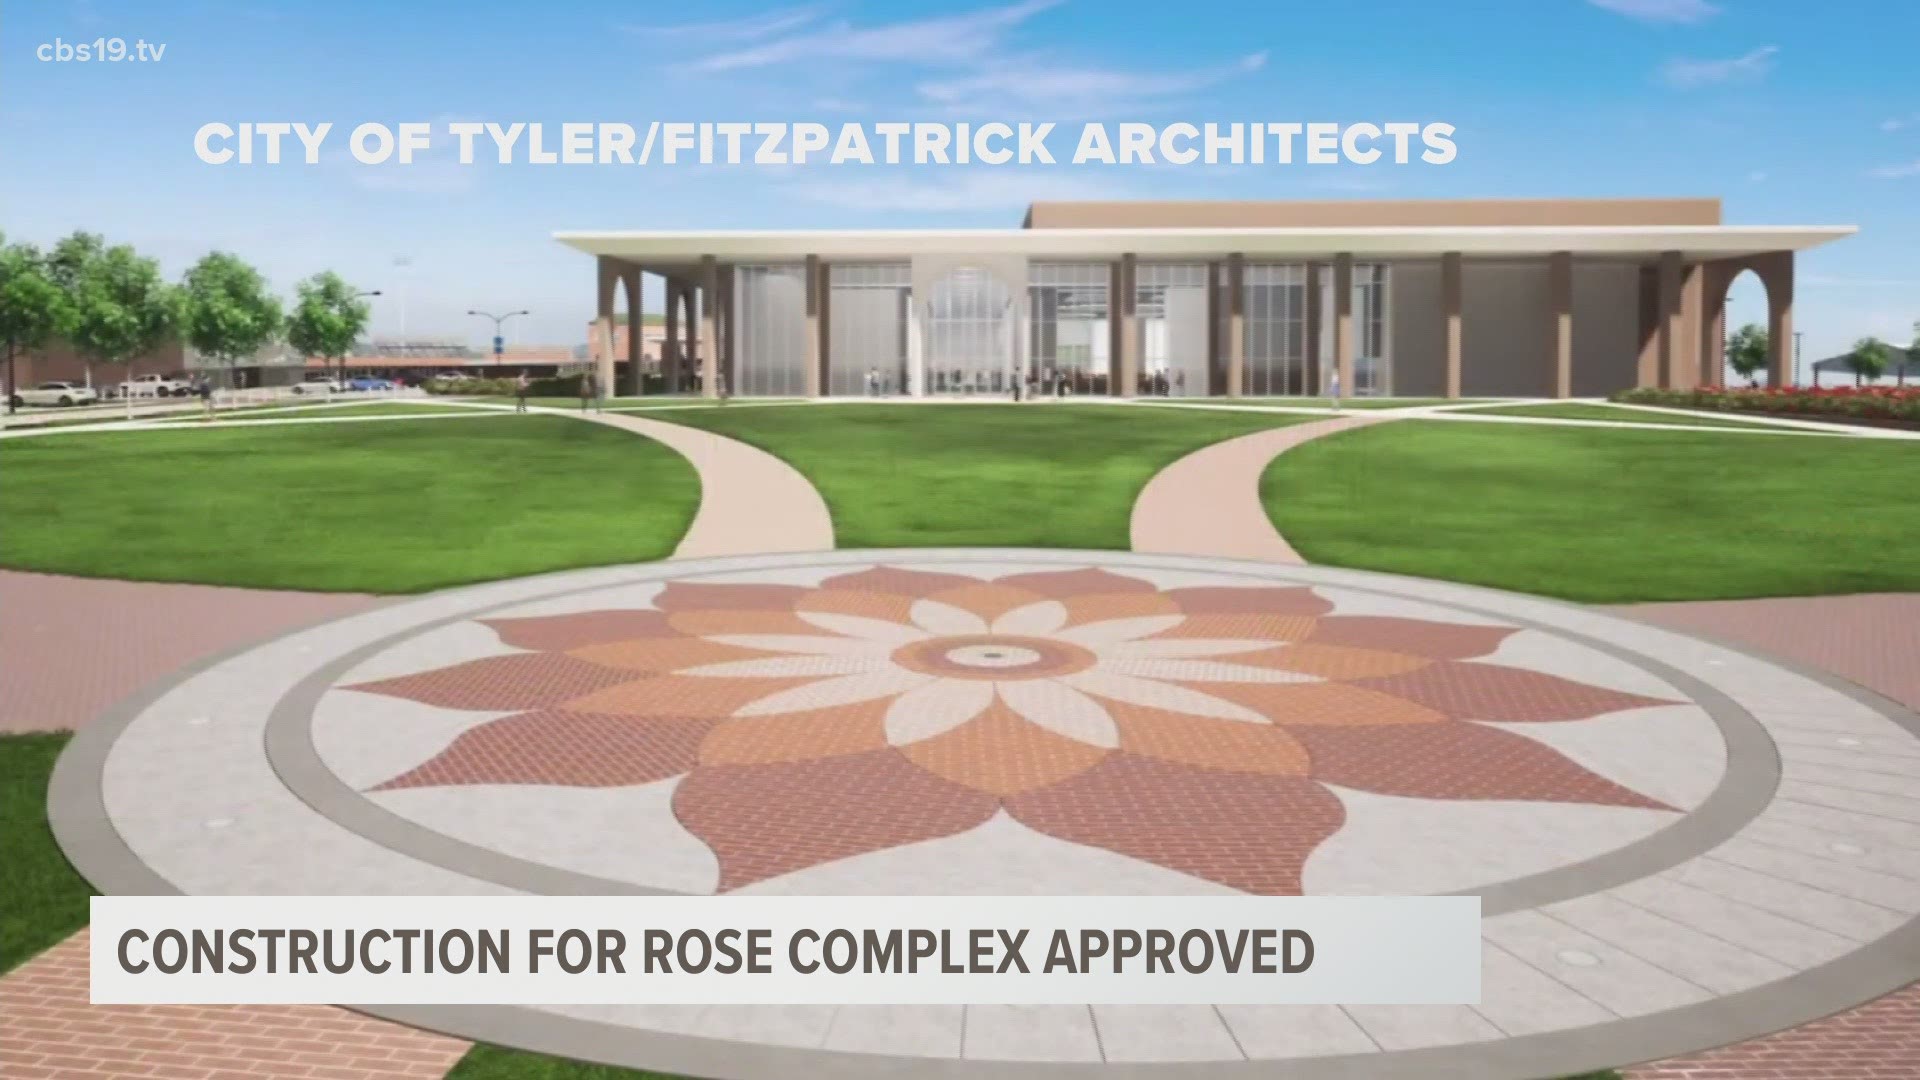 Construction is anticipated to begin in June for a new convention center to replace Harvey Hall and finish around October 2022 for the Rose Festival season.